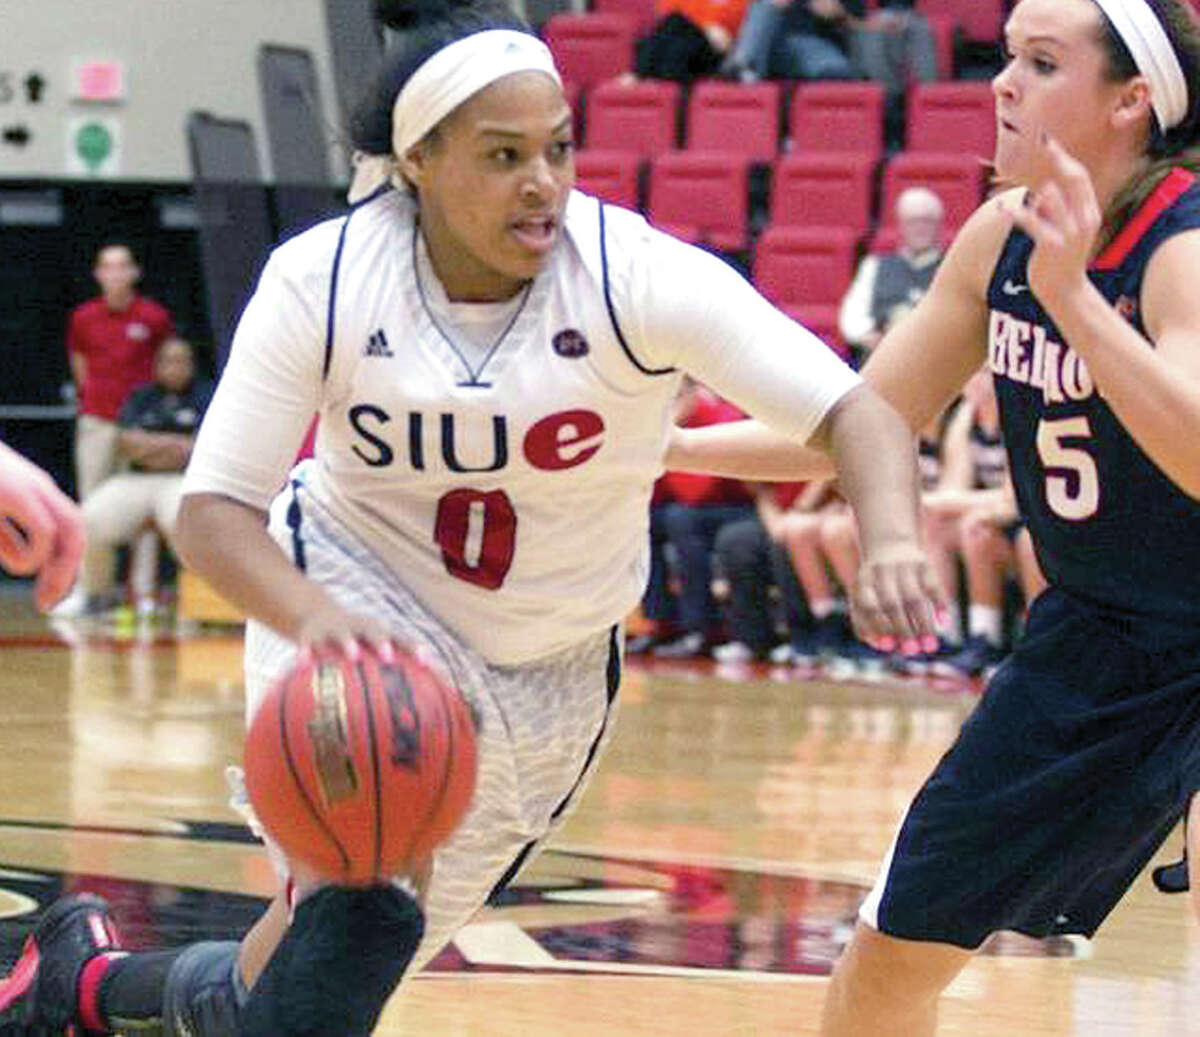 Shronda Butts (0) led SIUE with 32 points in the Cougars’ win over Belmont Tuesday night at the Vadalabene Center.